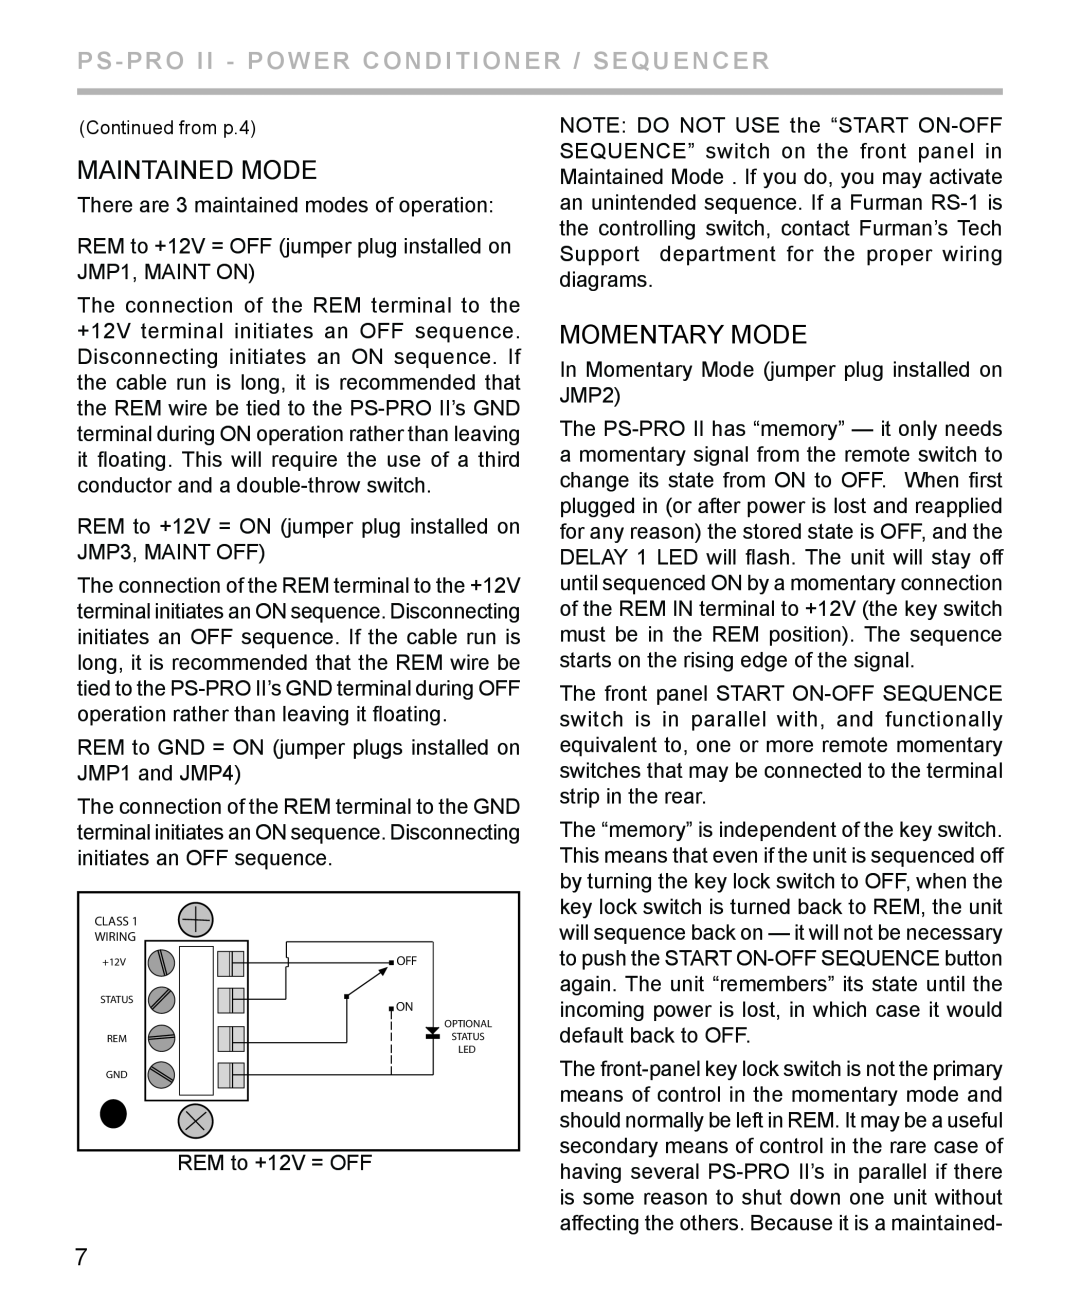 Furman Sound PS-PRO II manual MAINTAINED Mode, Momentary Mode, PS - PRO II - POWER CONDITIONER / sequencer 